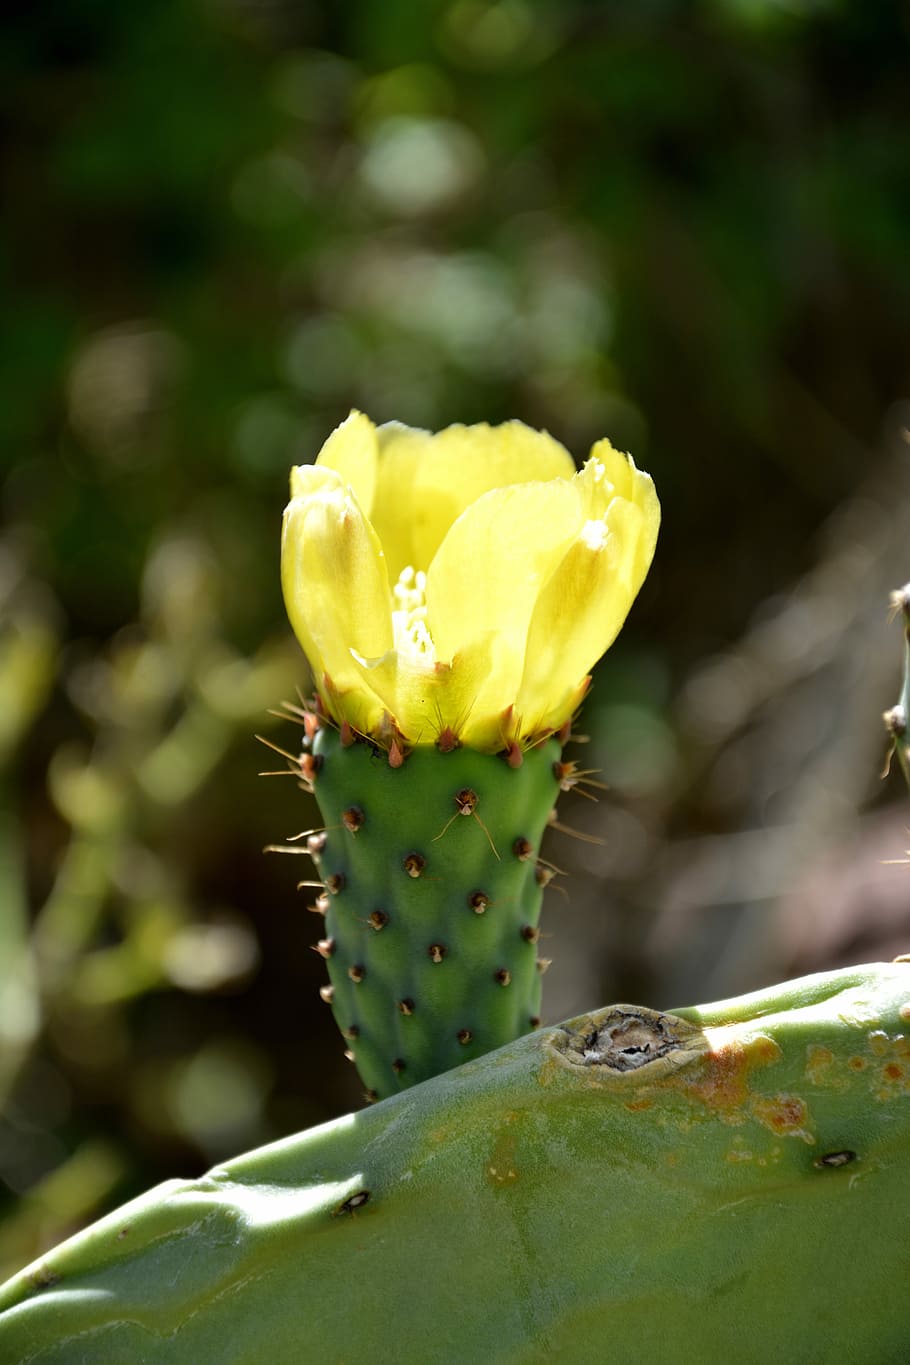 Cactus Flower, Cacti, flower, thorny plant, cactus, thorn, prickly pear cactus, nature, yellow, plant